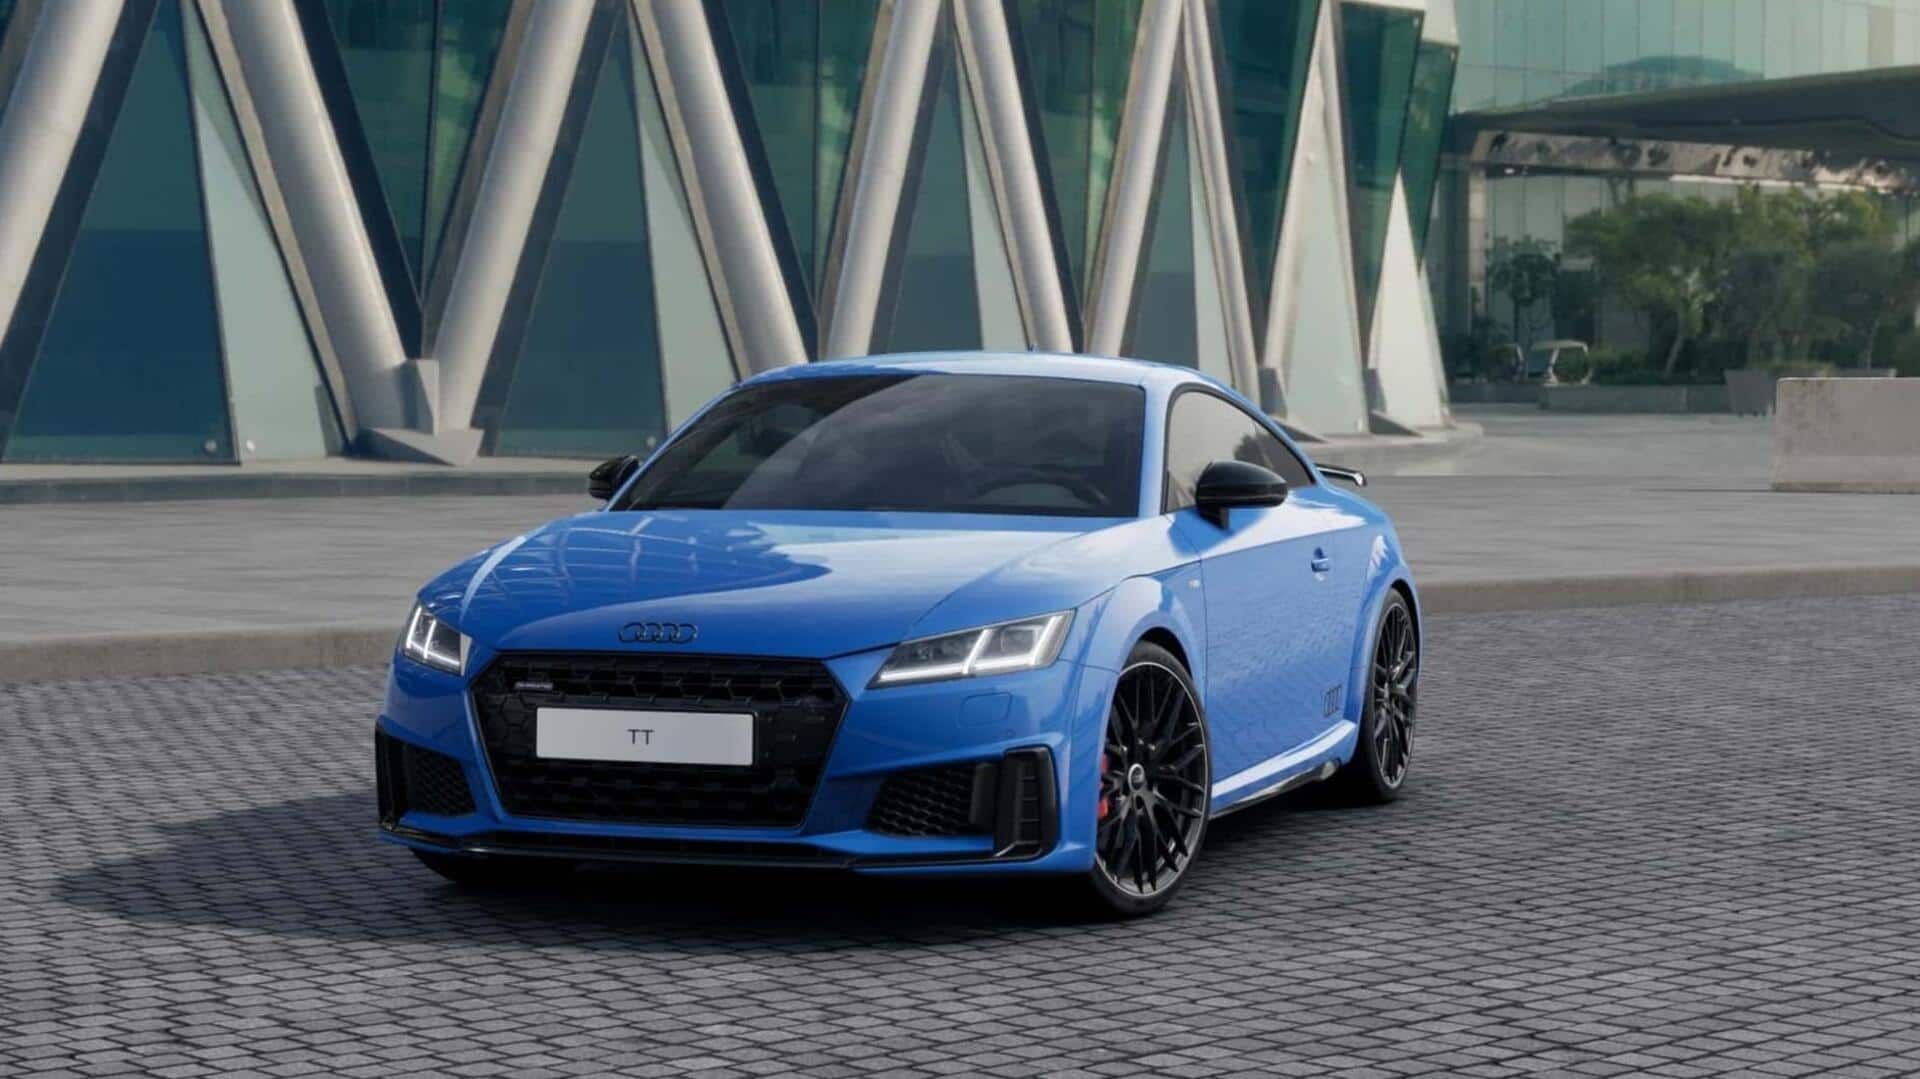 Audi TT Special Edition, limited to 25 units, breaks cover